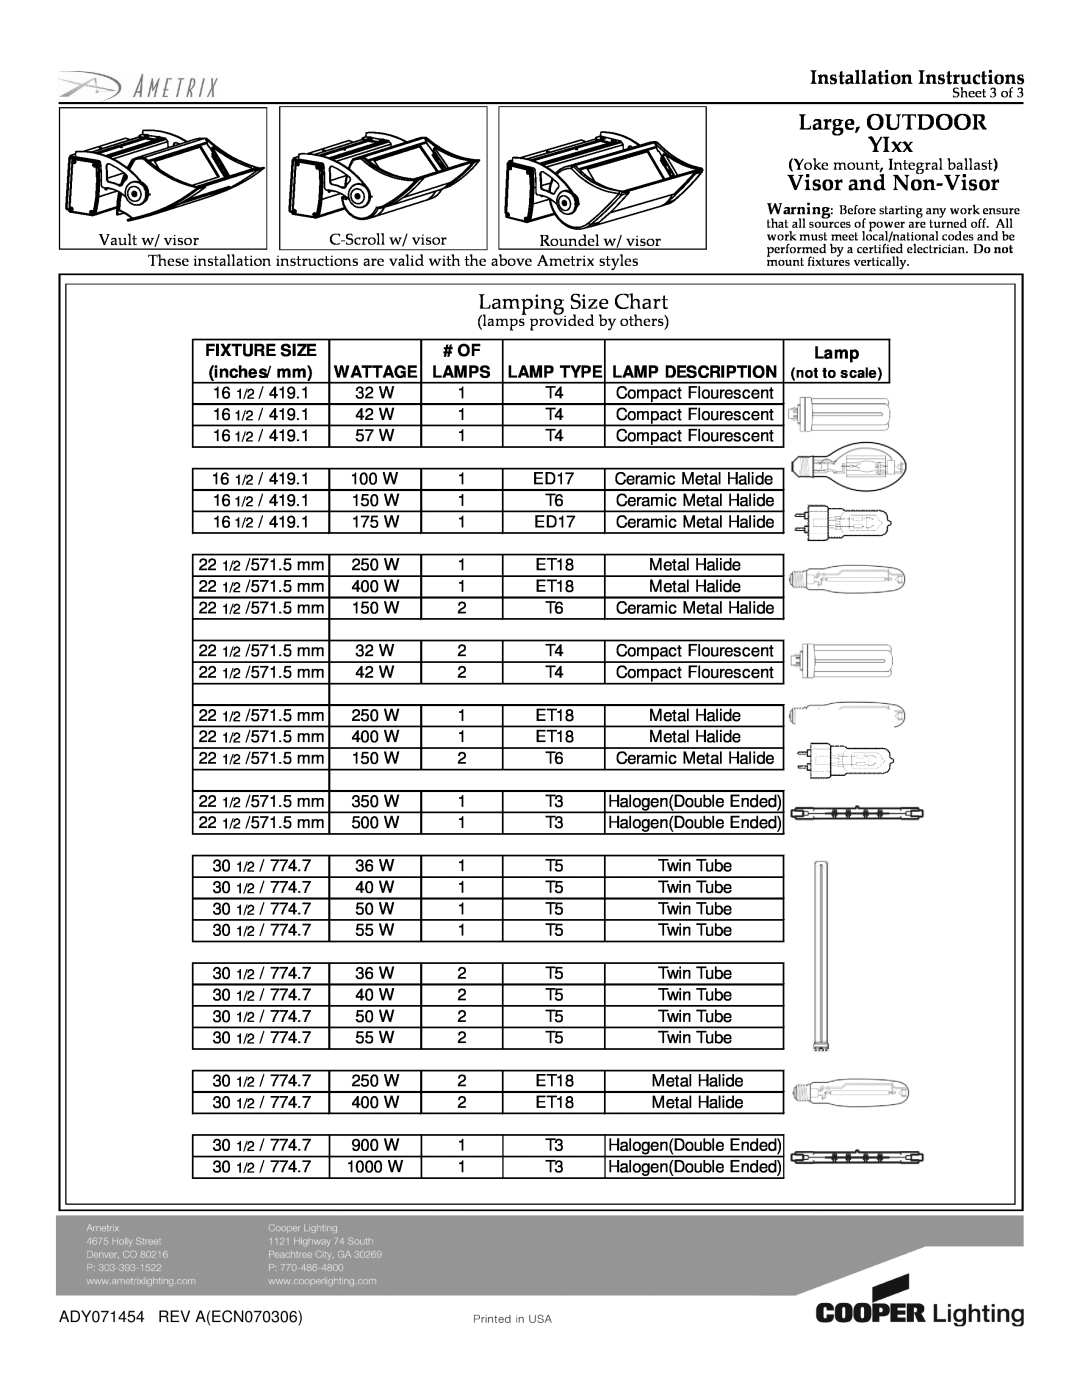 Cooper Lighting Lamping Size Chart, Large, OUTDOOR YIxx, Visor and Non-Visor, Installation Instructions, Fixture Size 